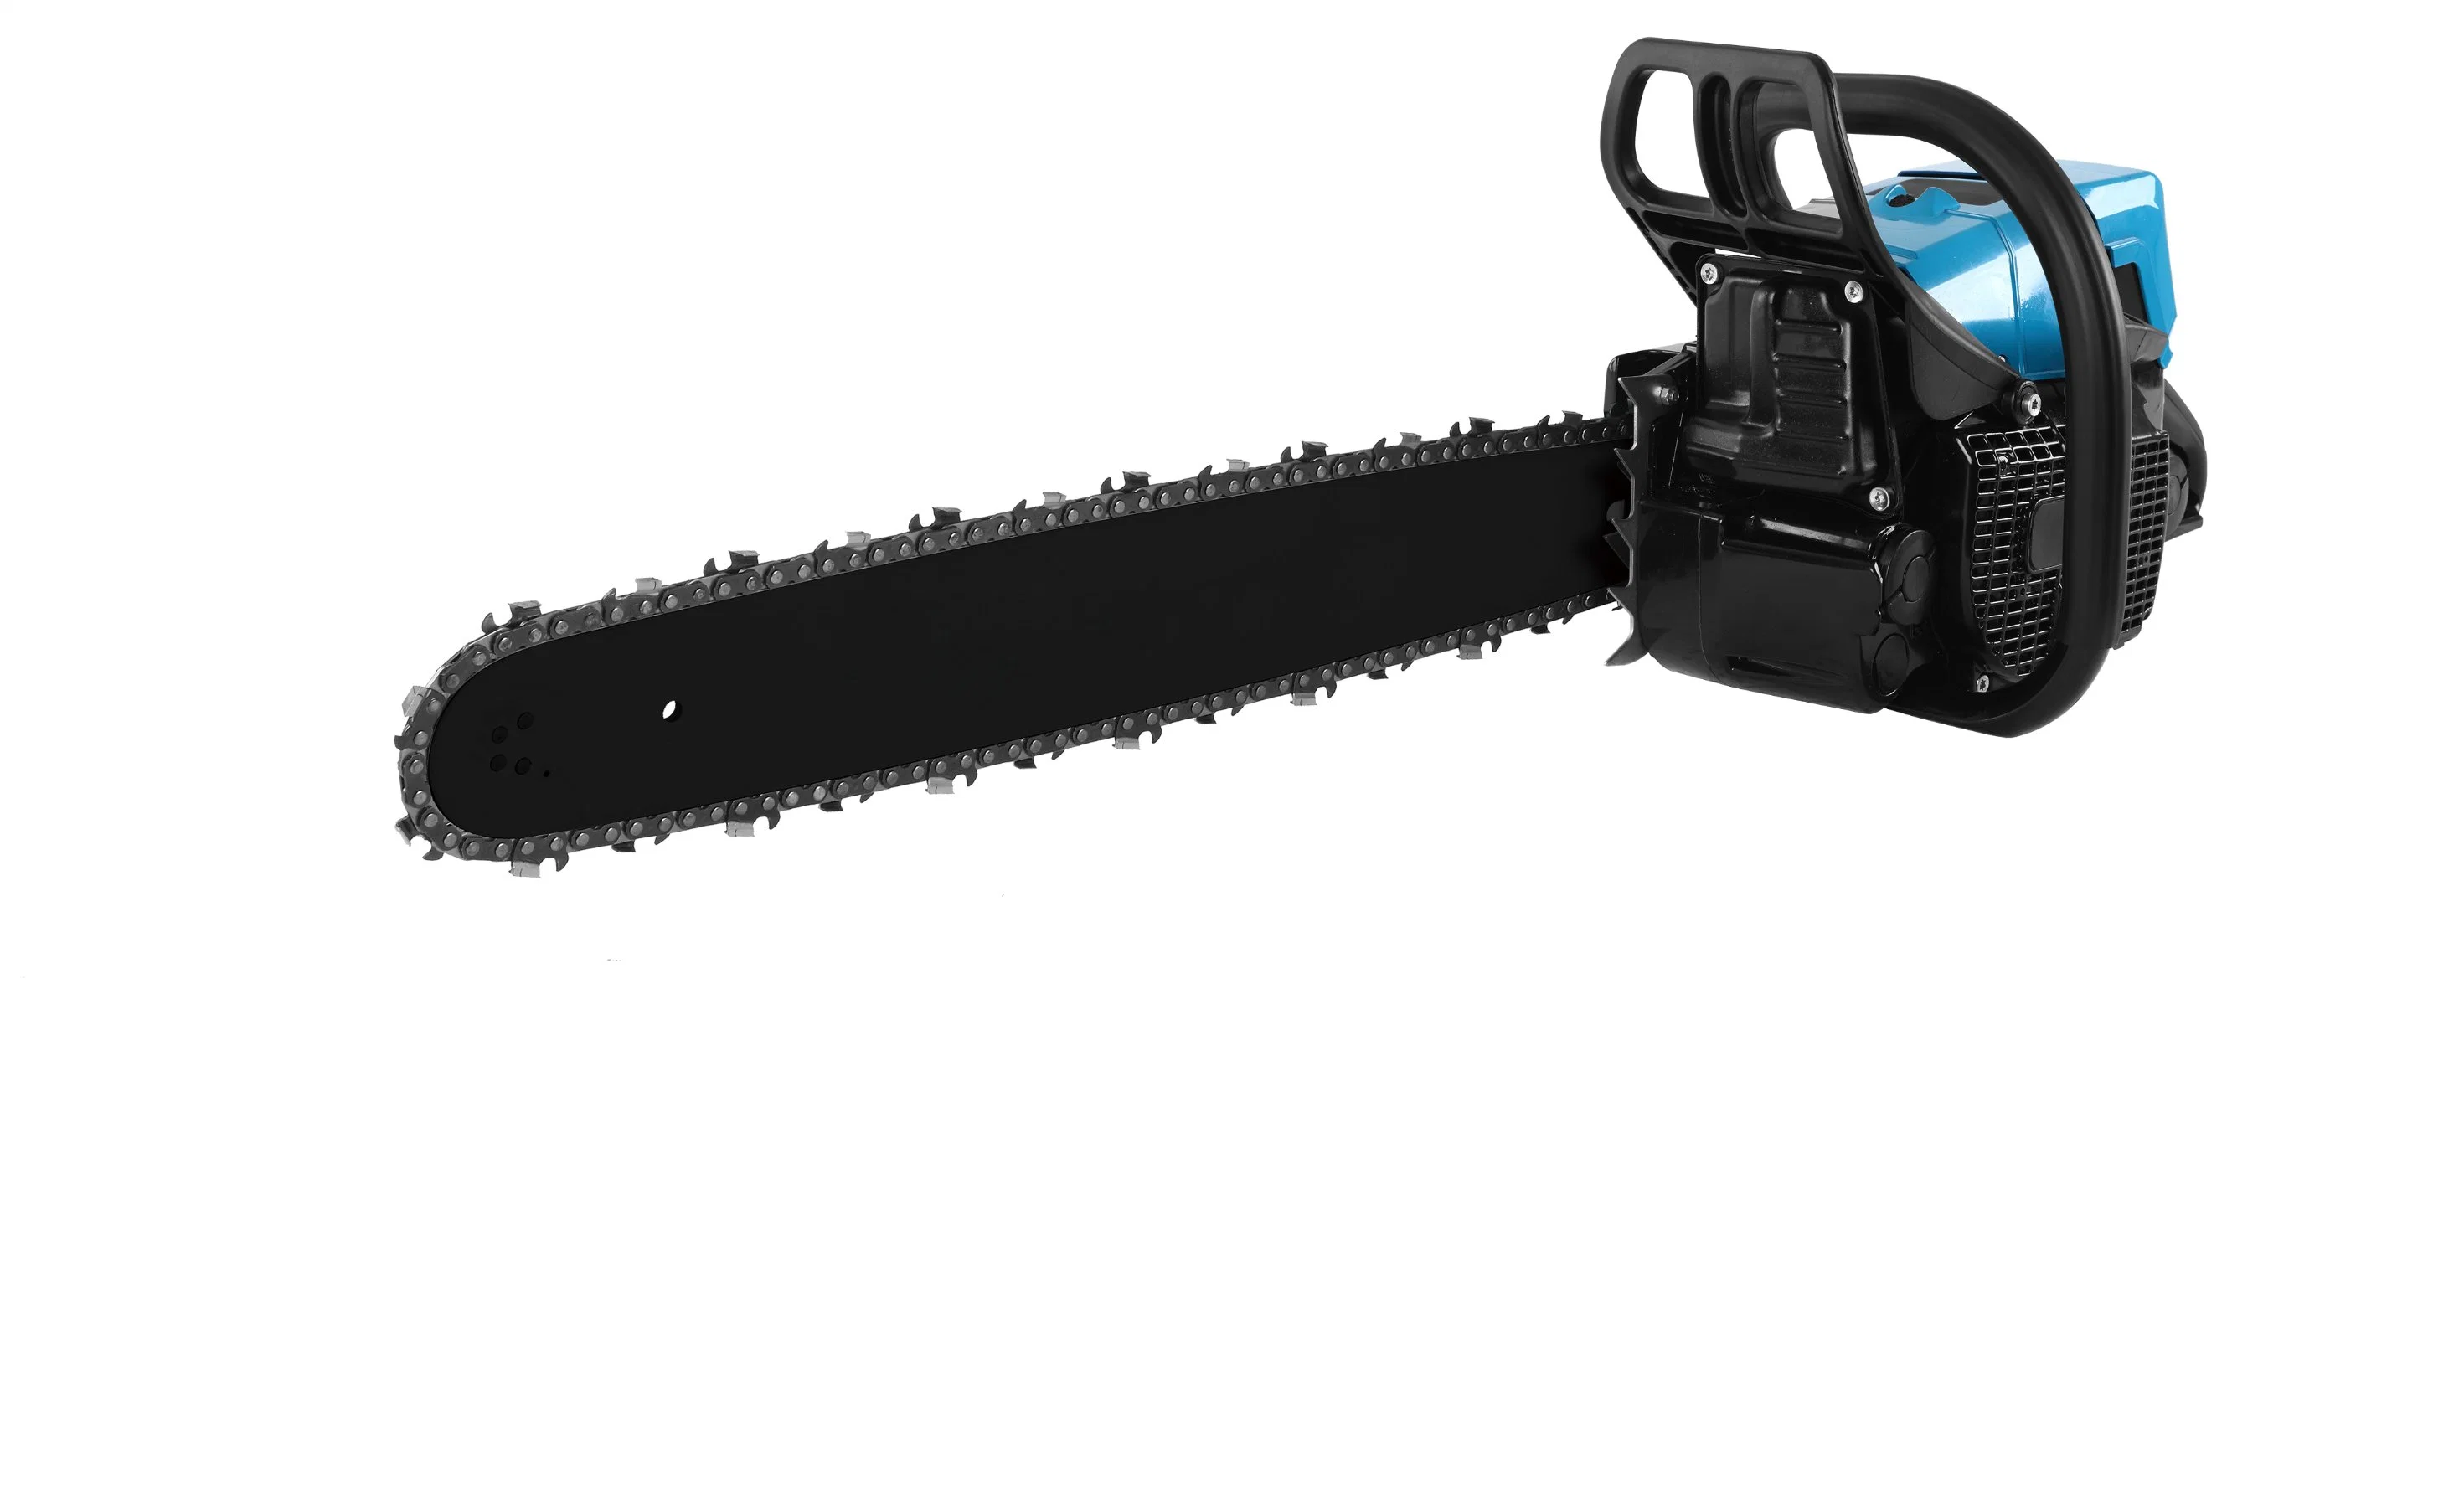 Hanakawa H971 (440) 70.7cc 2-Cycle Gas Powered Chainsaw, 20-Inch Chainsaw, Cordless Handheld Gasoline Power Chain Saws for Cutting Trees, Wood, Garden and Farm